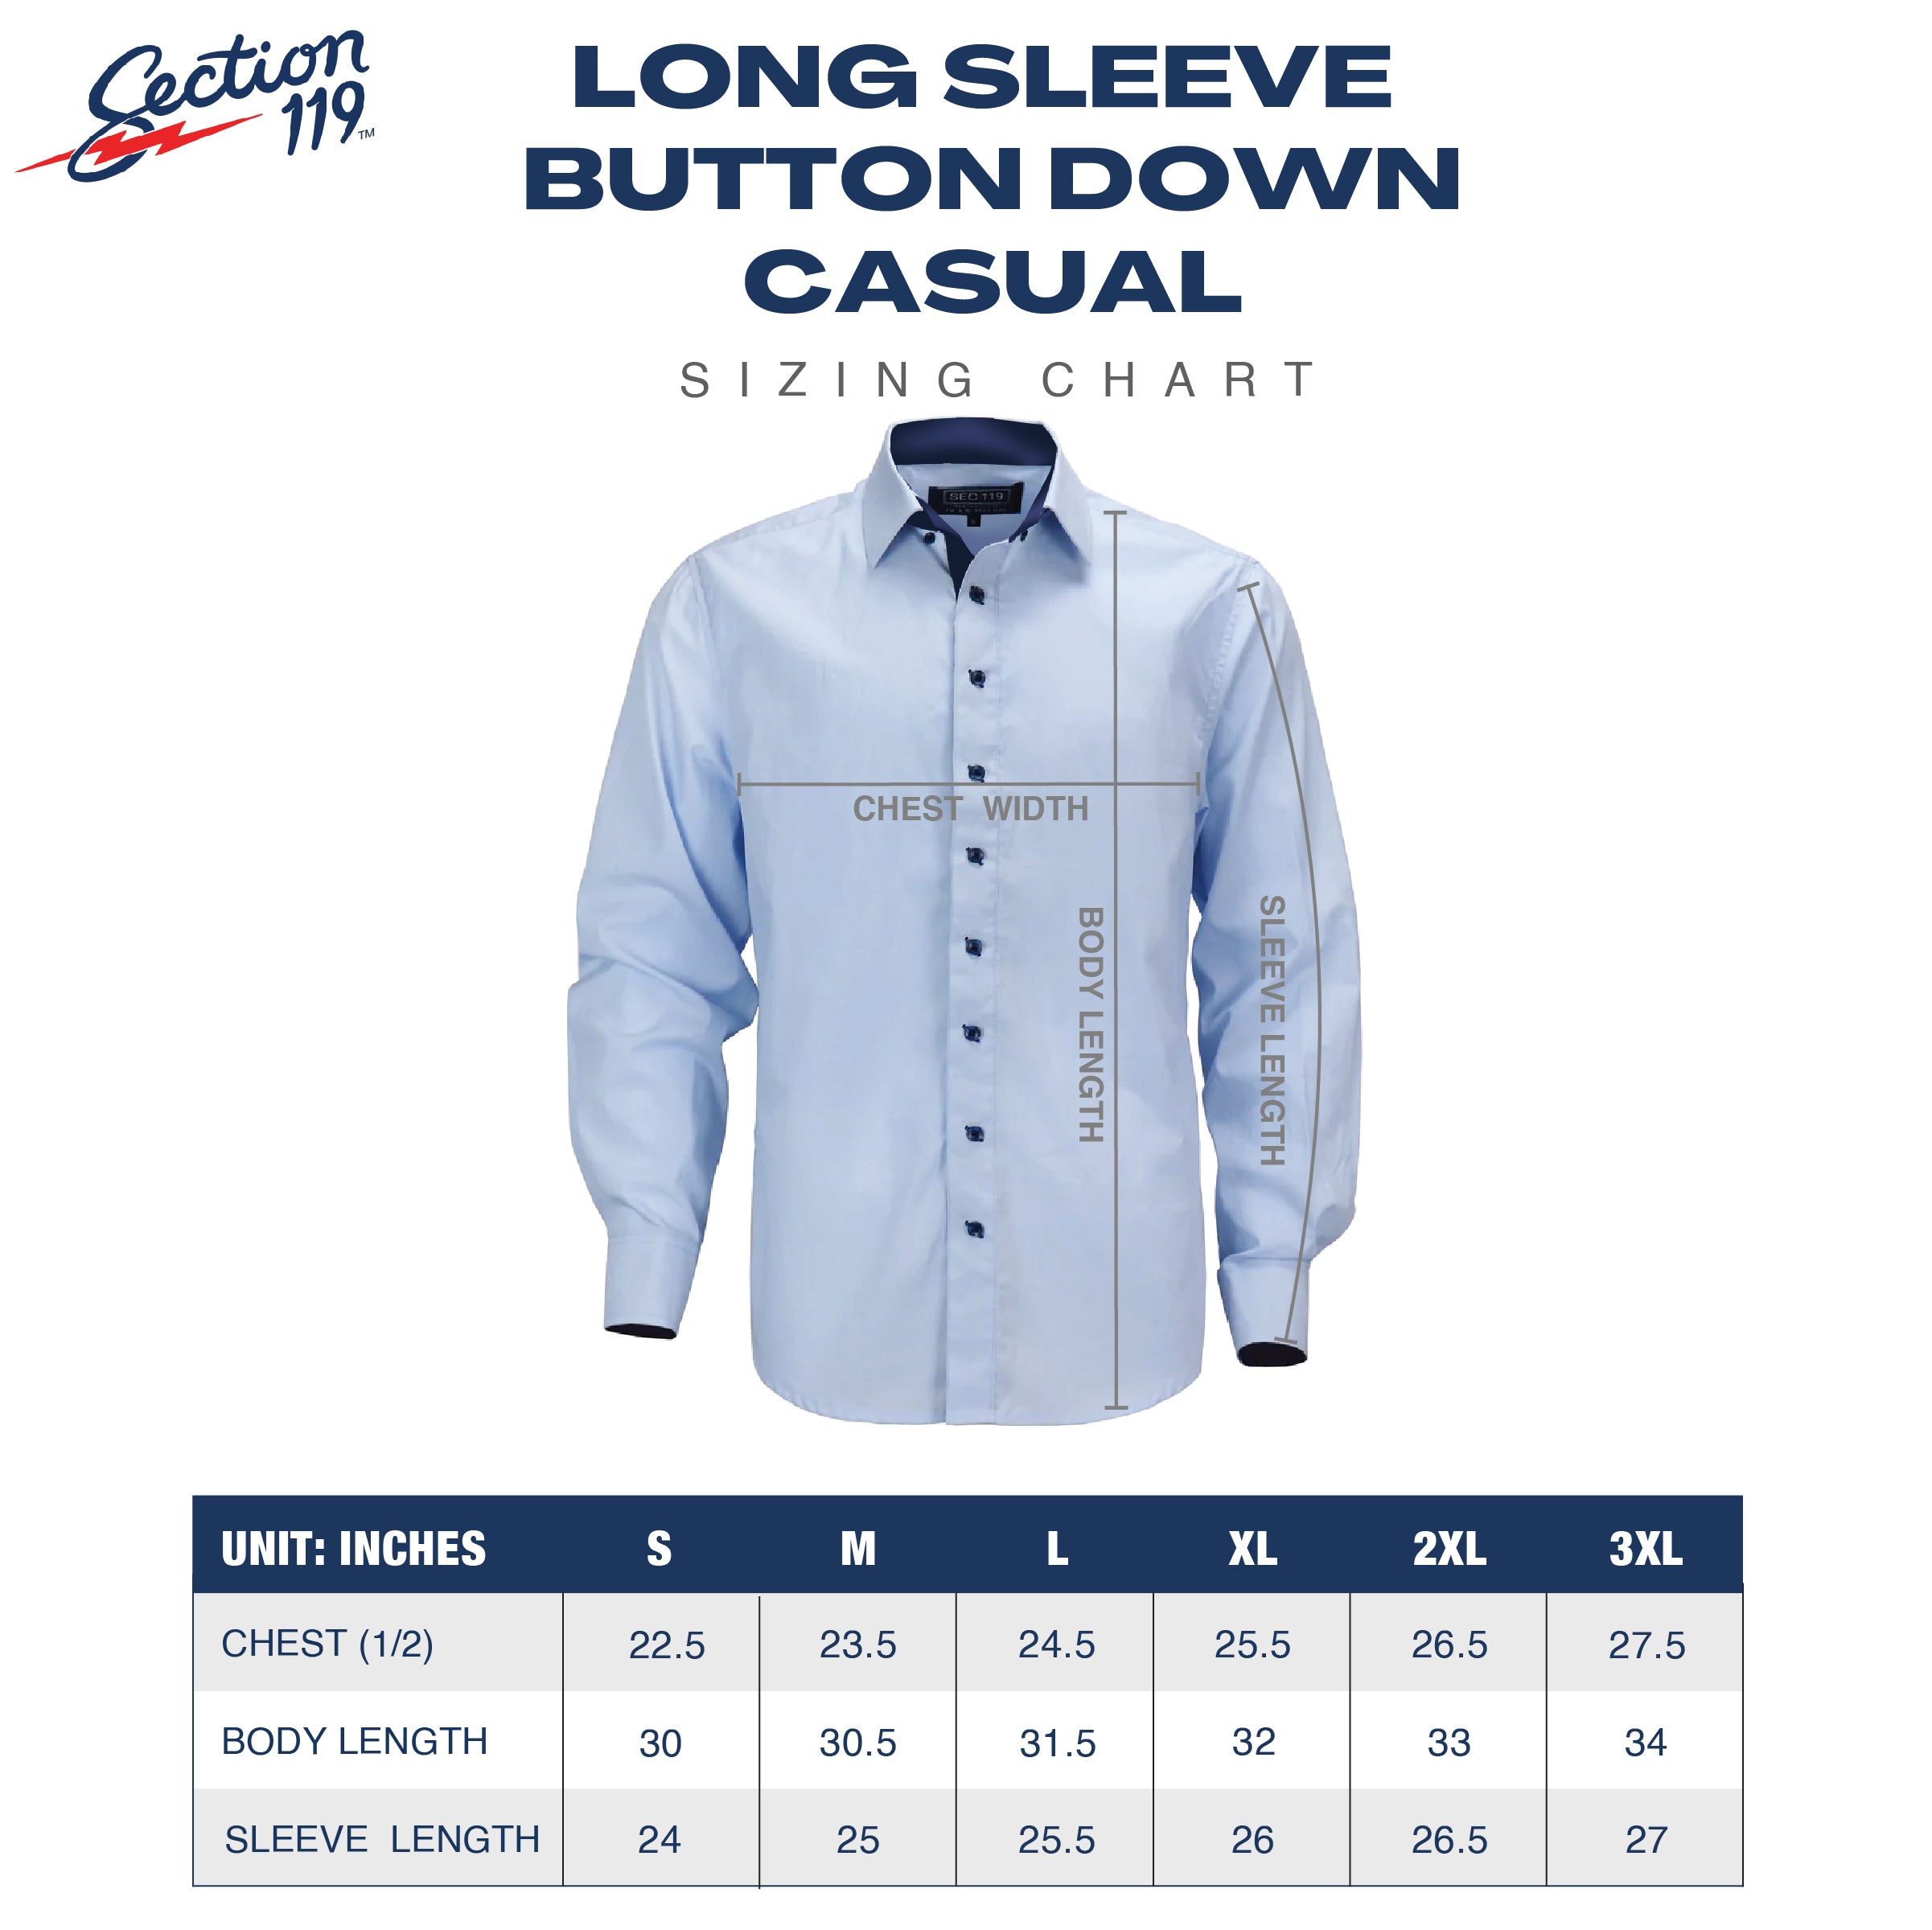 Phish Navy Casual Long Sleeve Button Down - Section 119